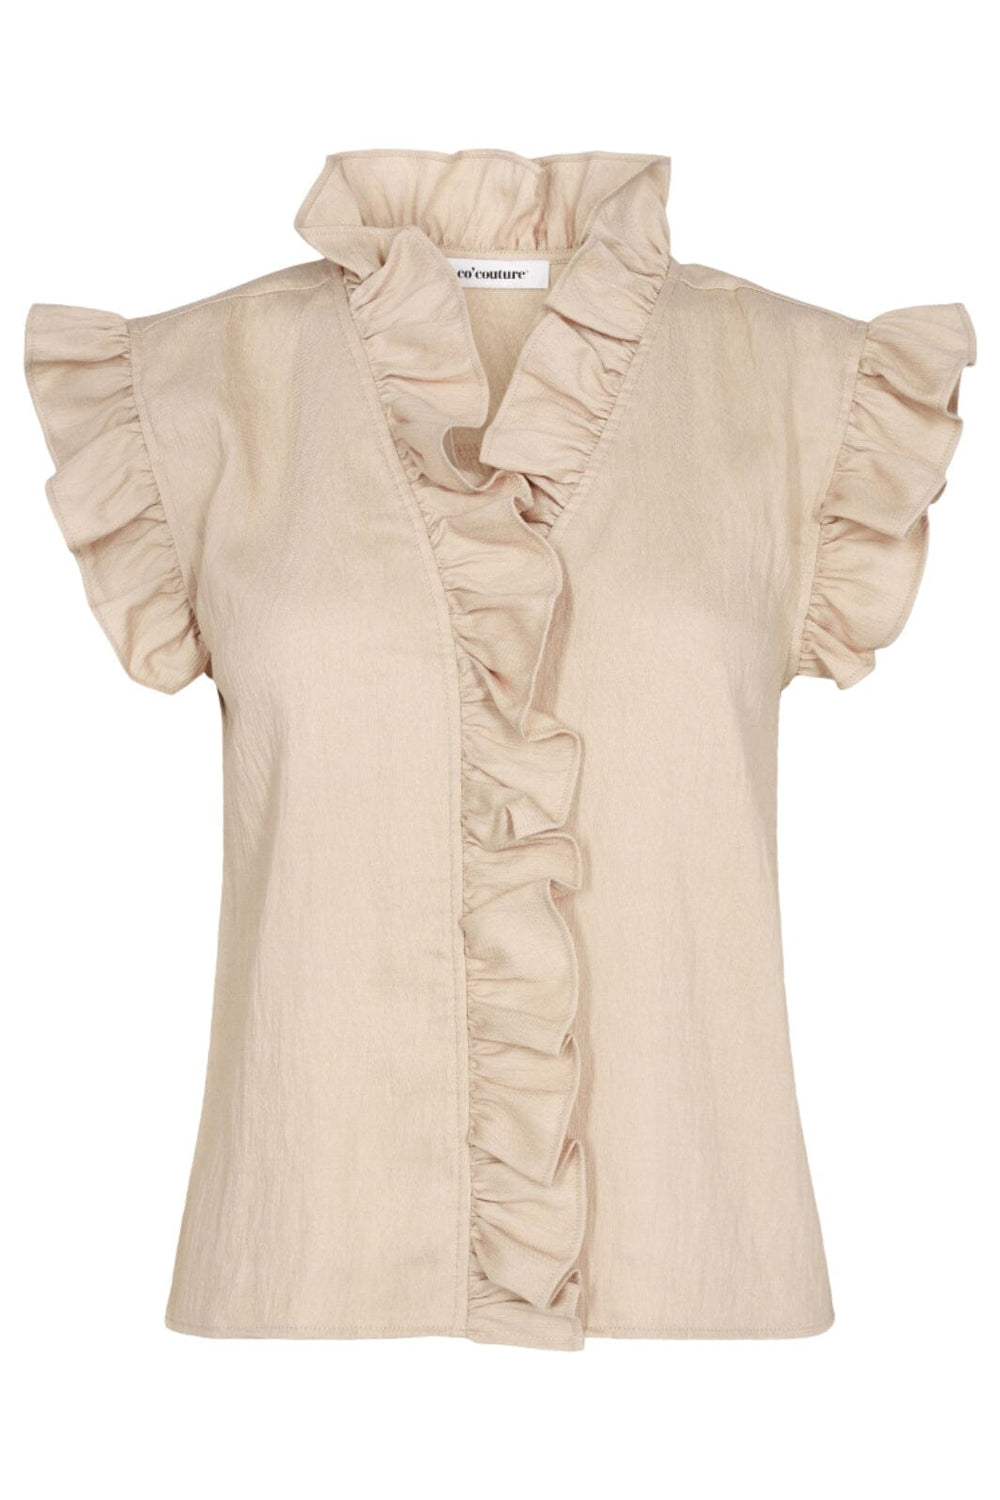 Co´couture - Suedacc Frill Top 35213 - 199 Bone Toppe 